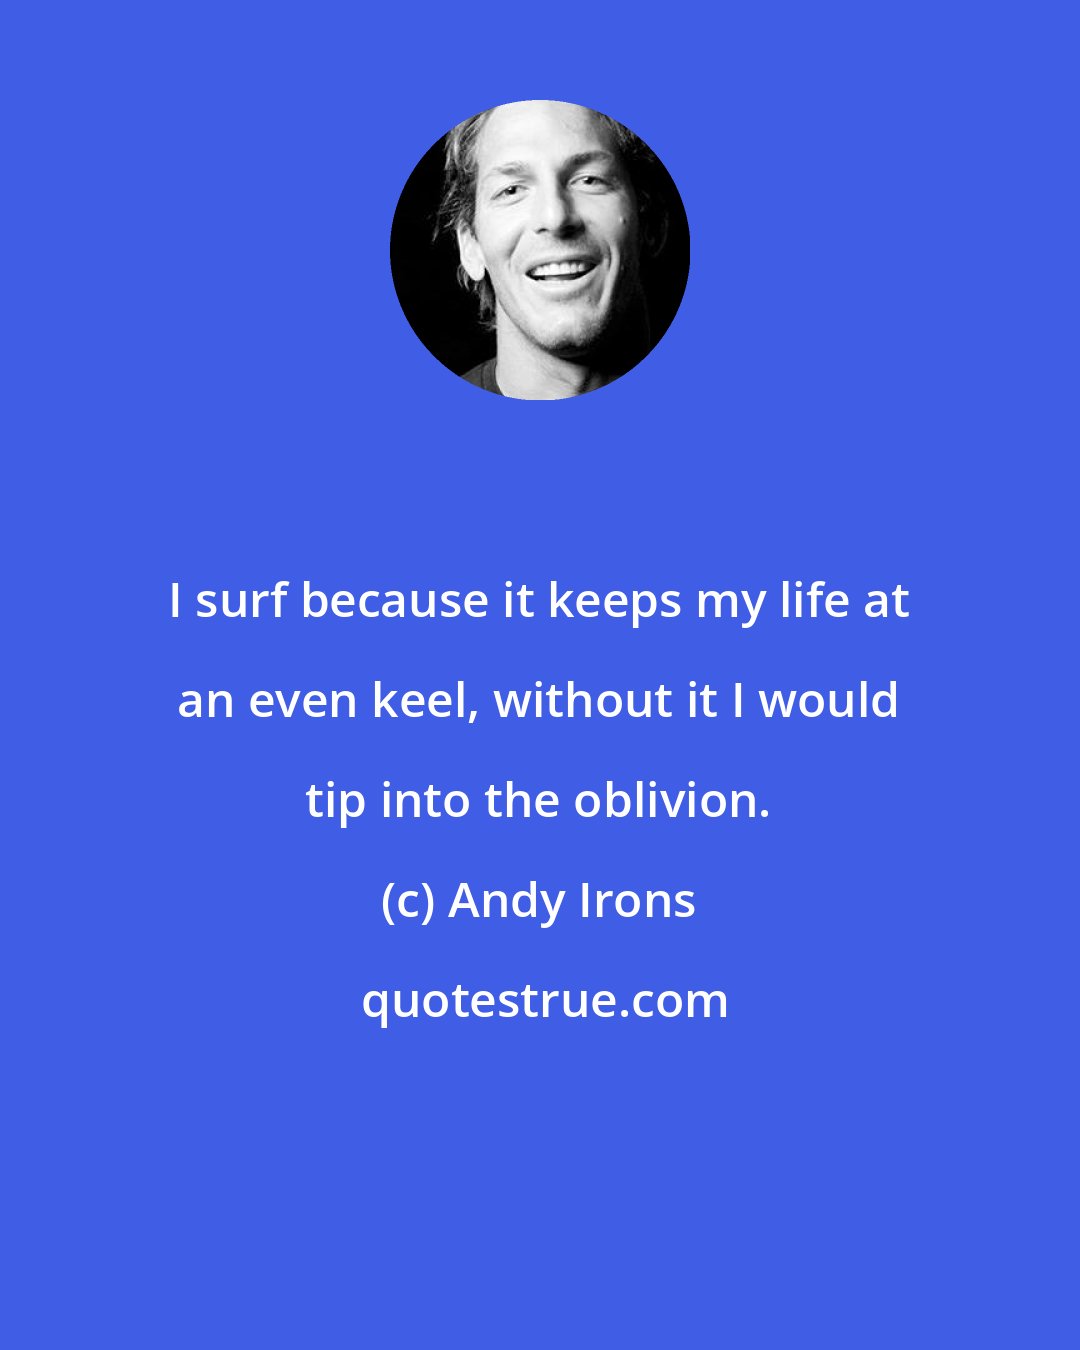 Andy Irons: I surf because it keeps my life at an even keel, without it I would tip into the oblivion.